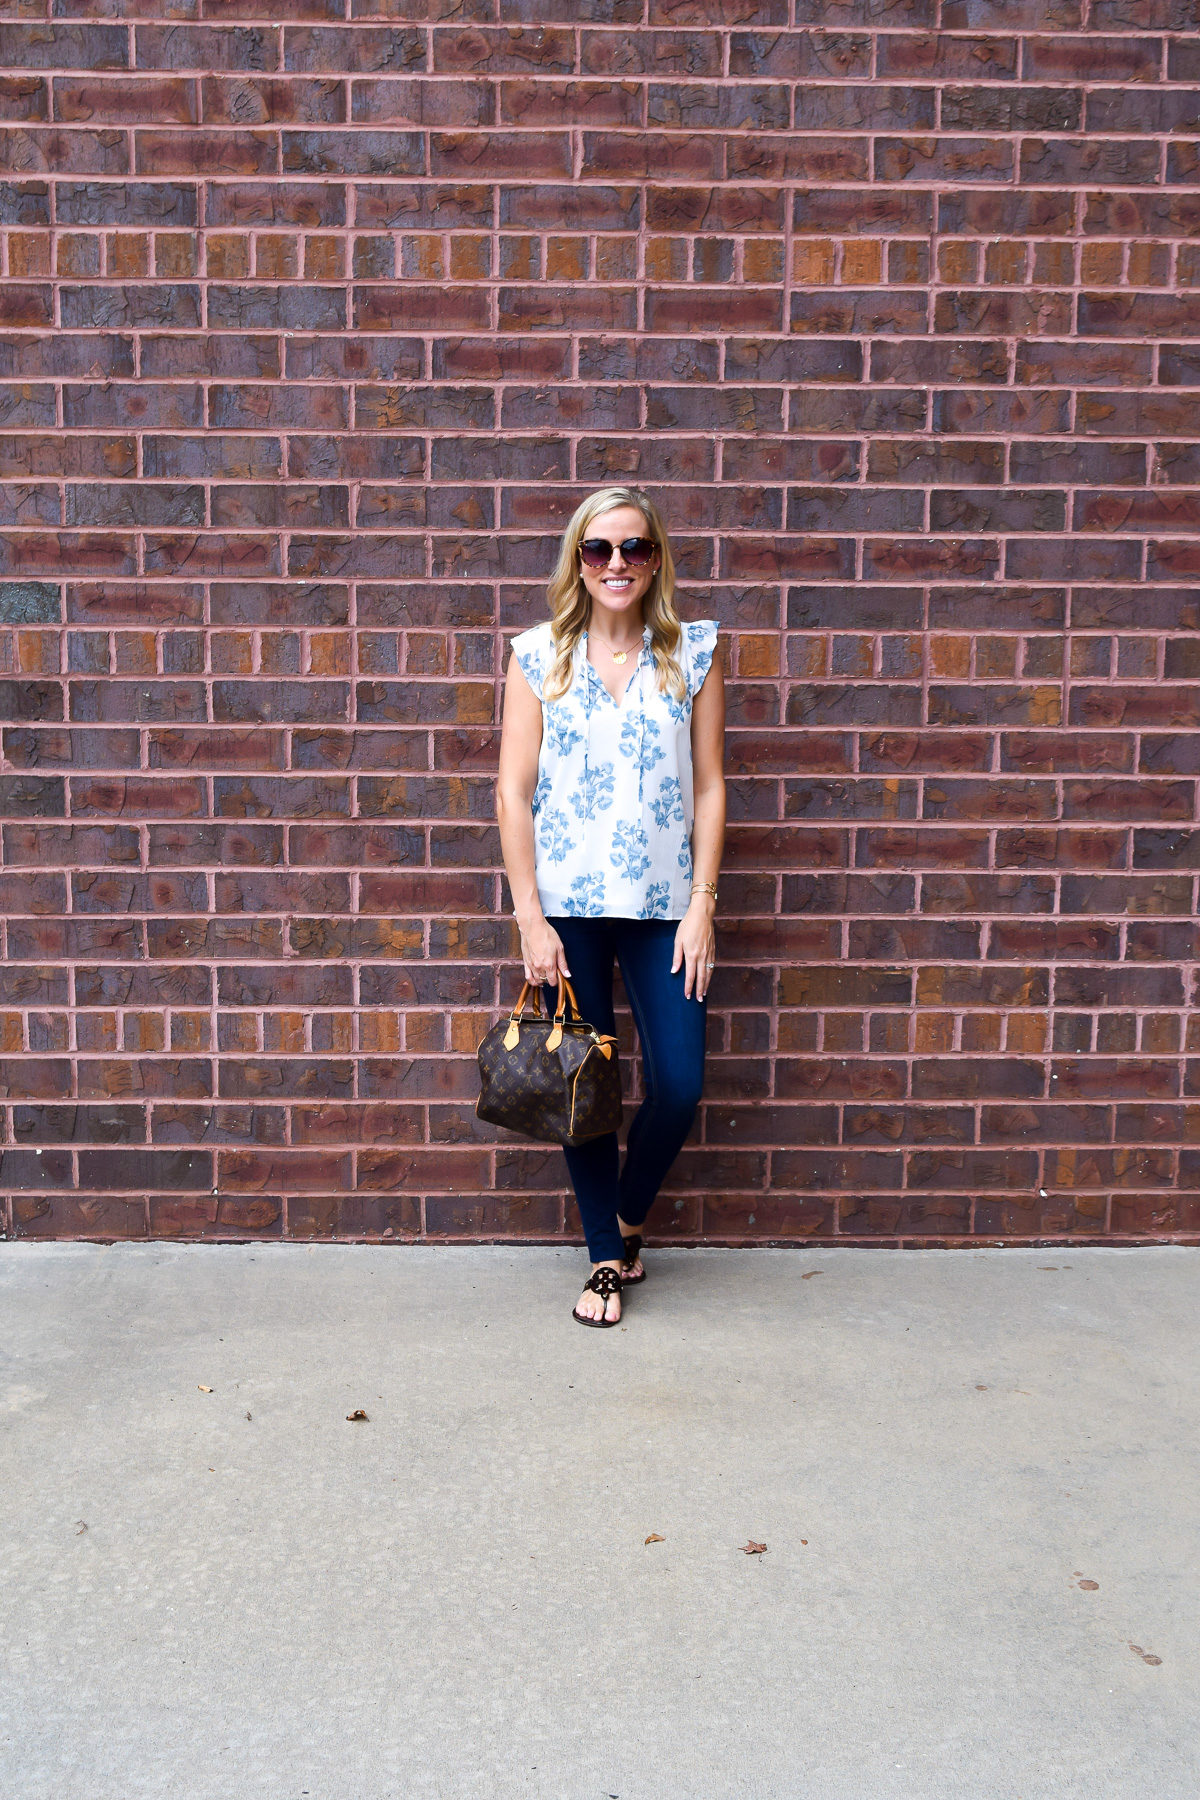 :: Blue + White Floral Top + Friday Finds + Link Love ::